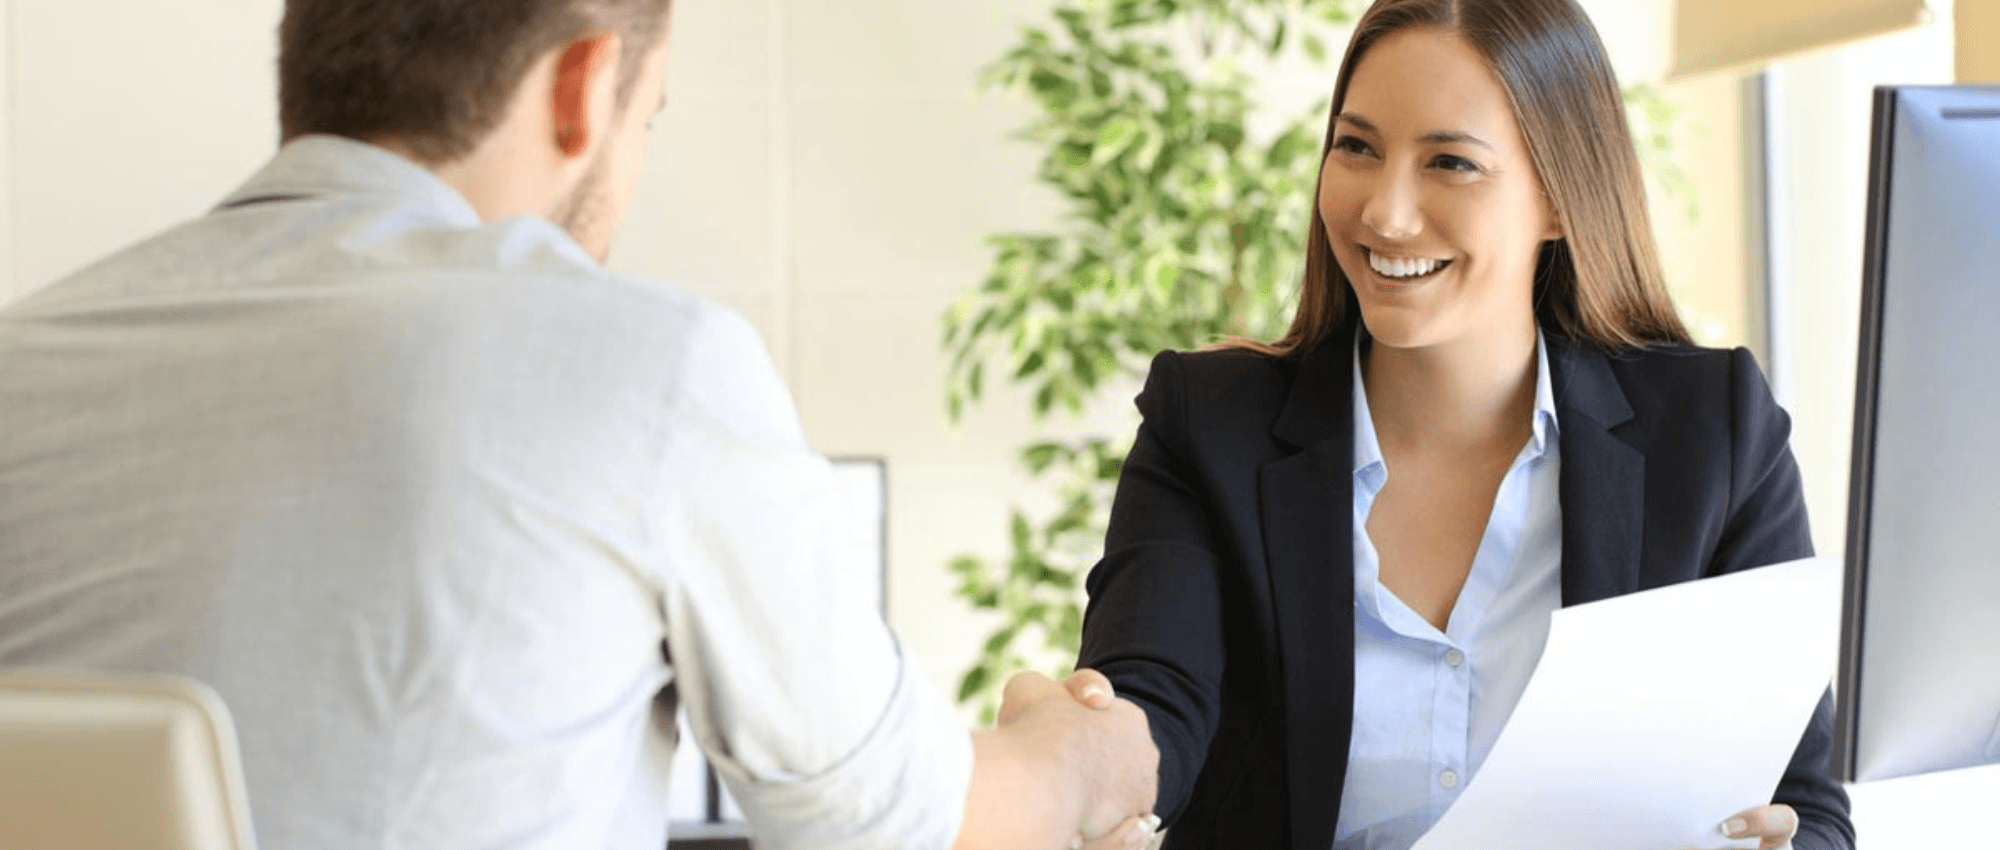 man and woman shaking hands at interview